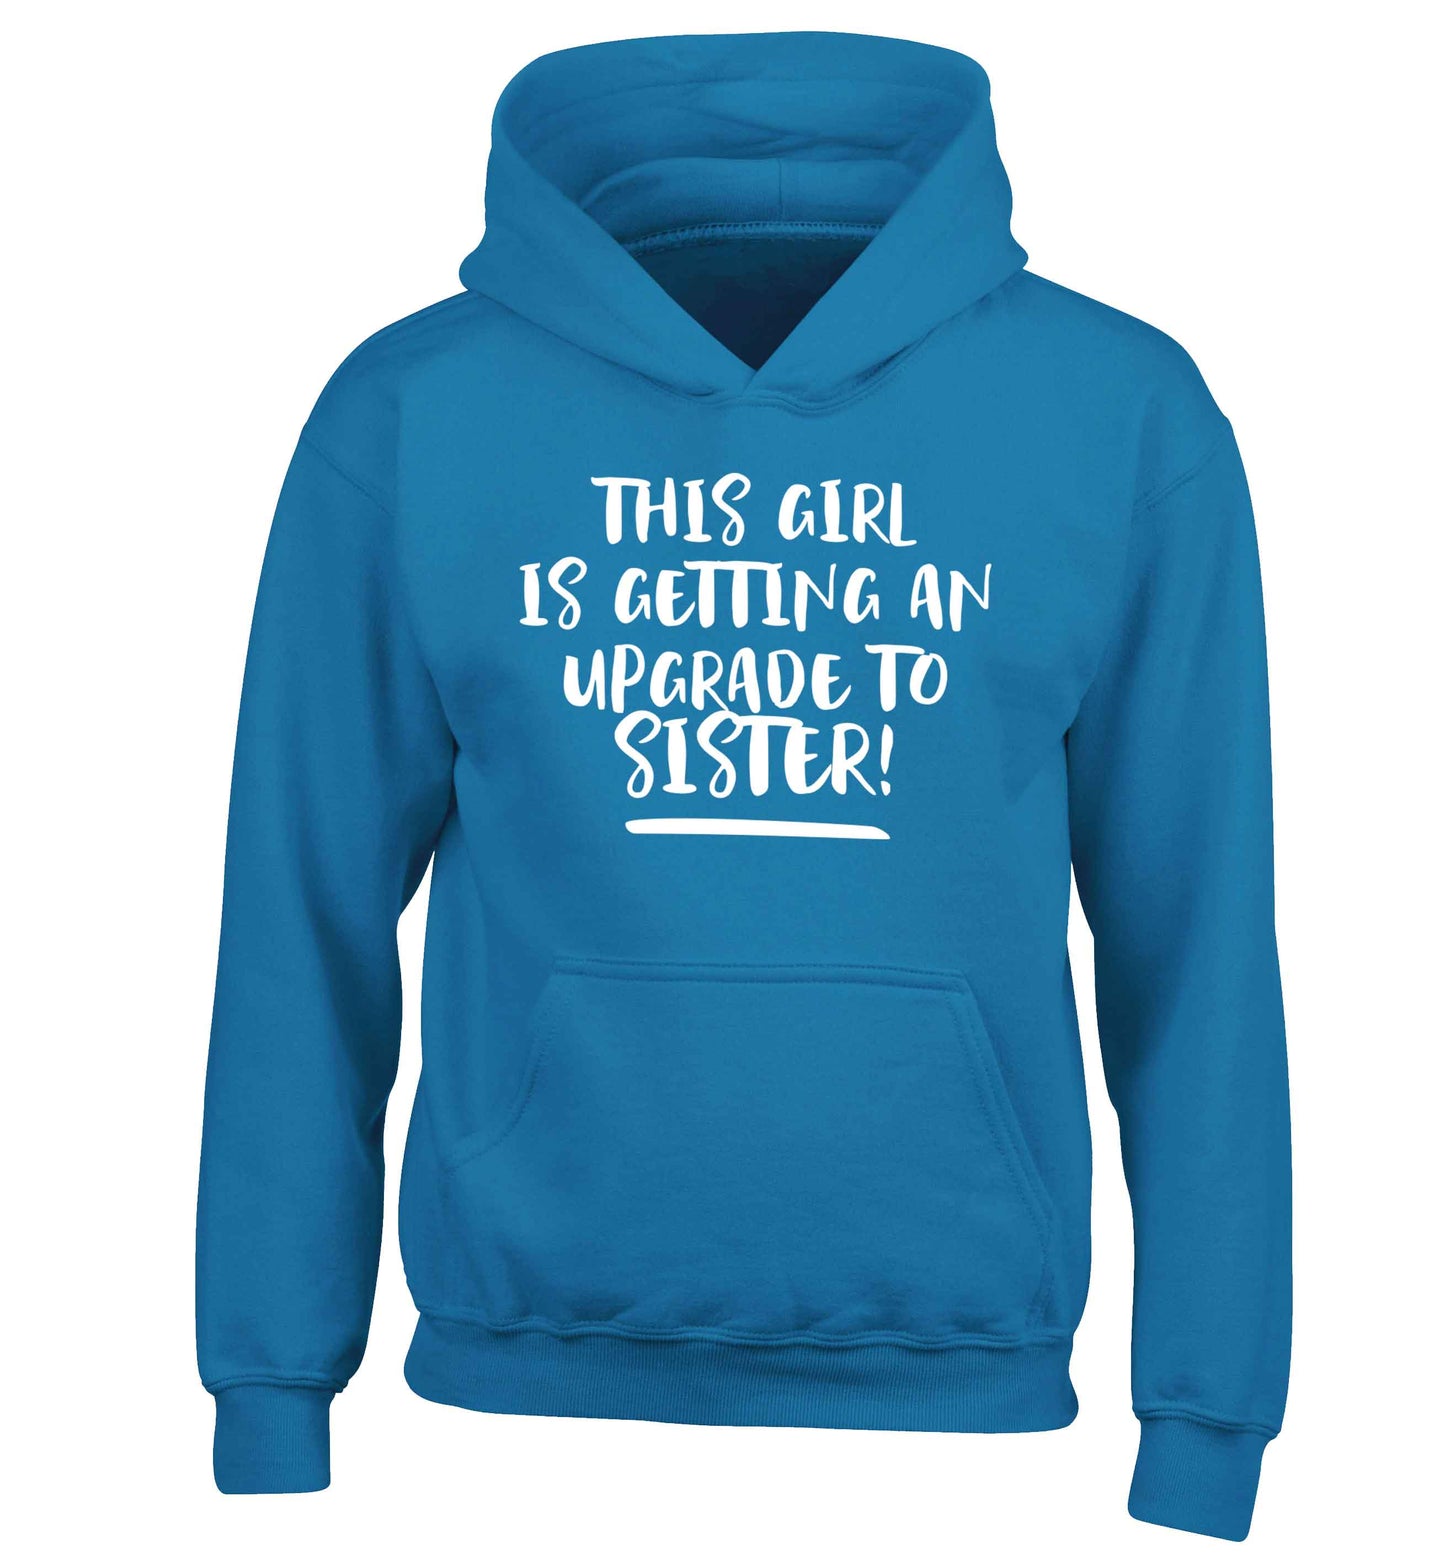 This girl is getting an upgrade to sister! children's blue hoodie 12-13 Years